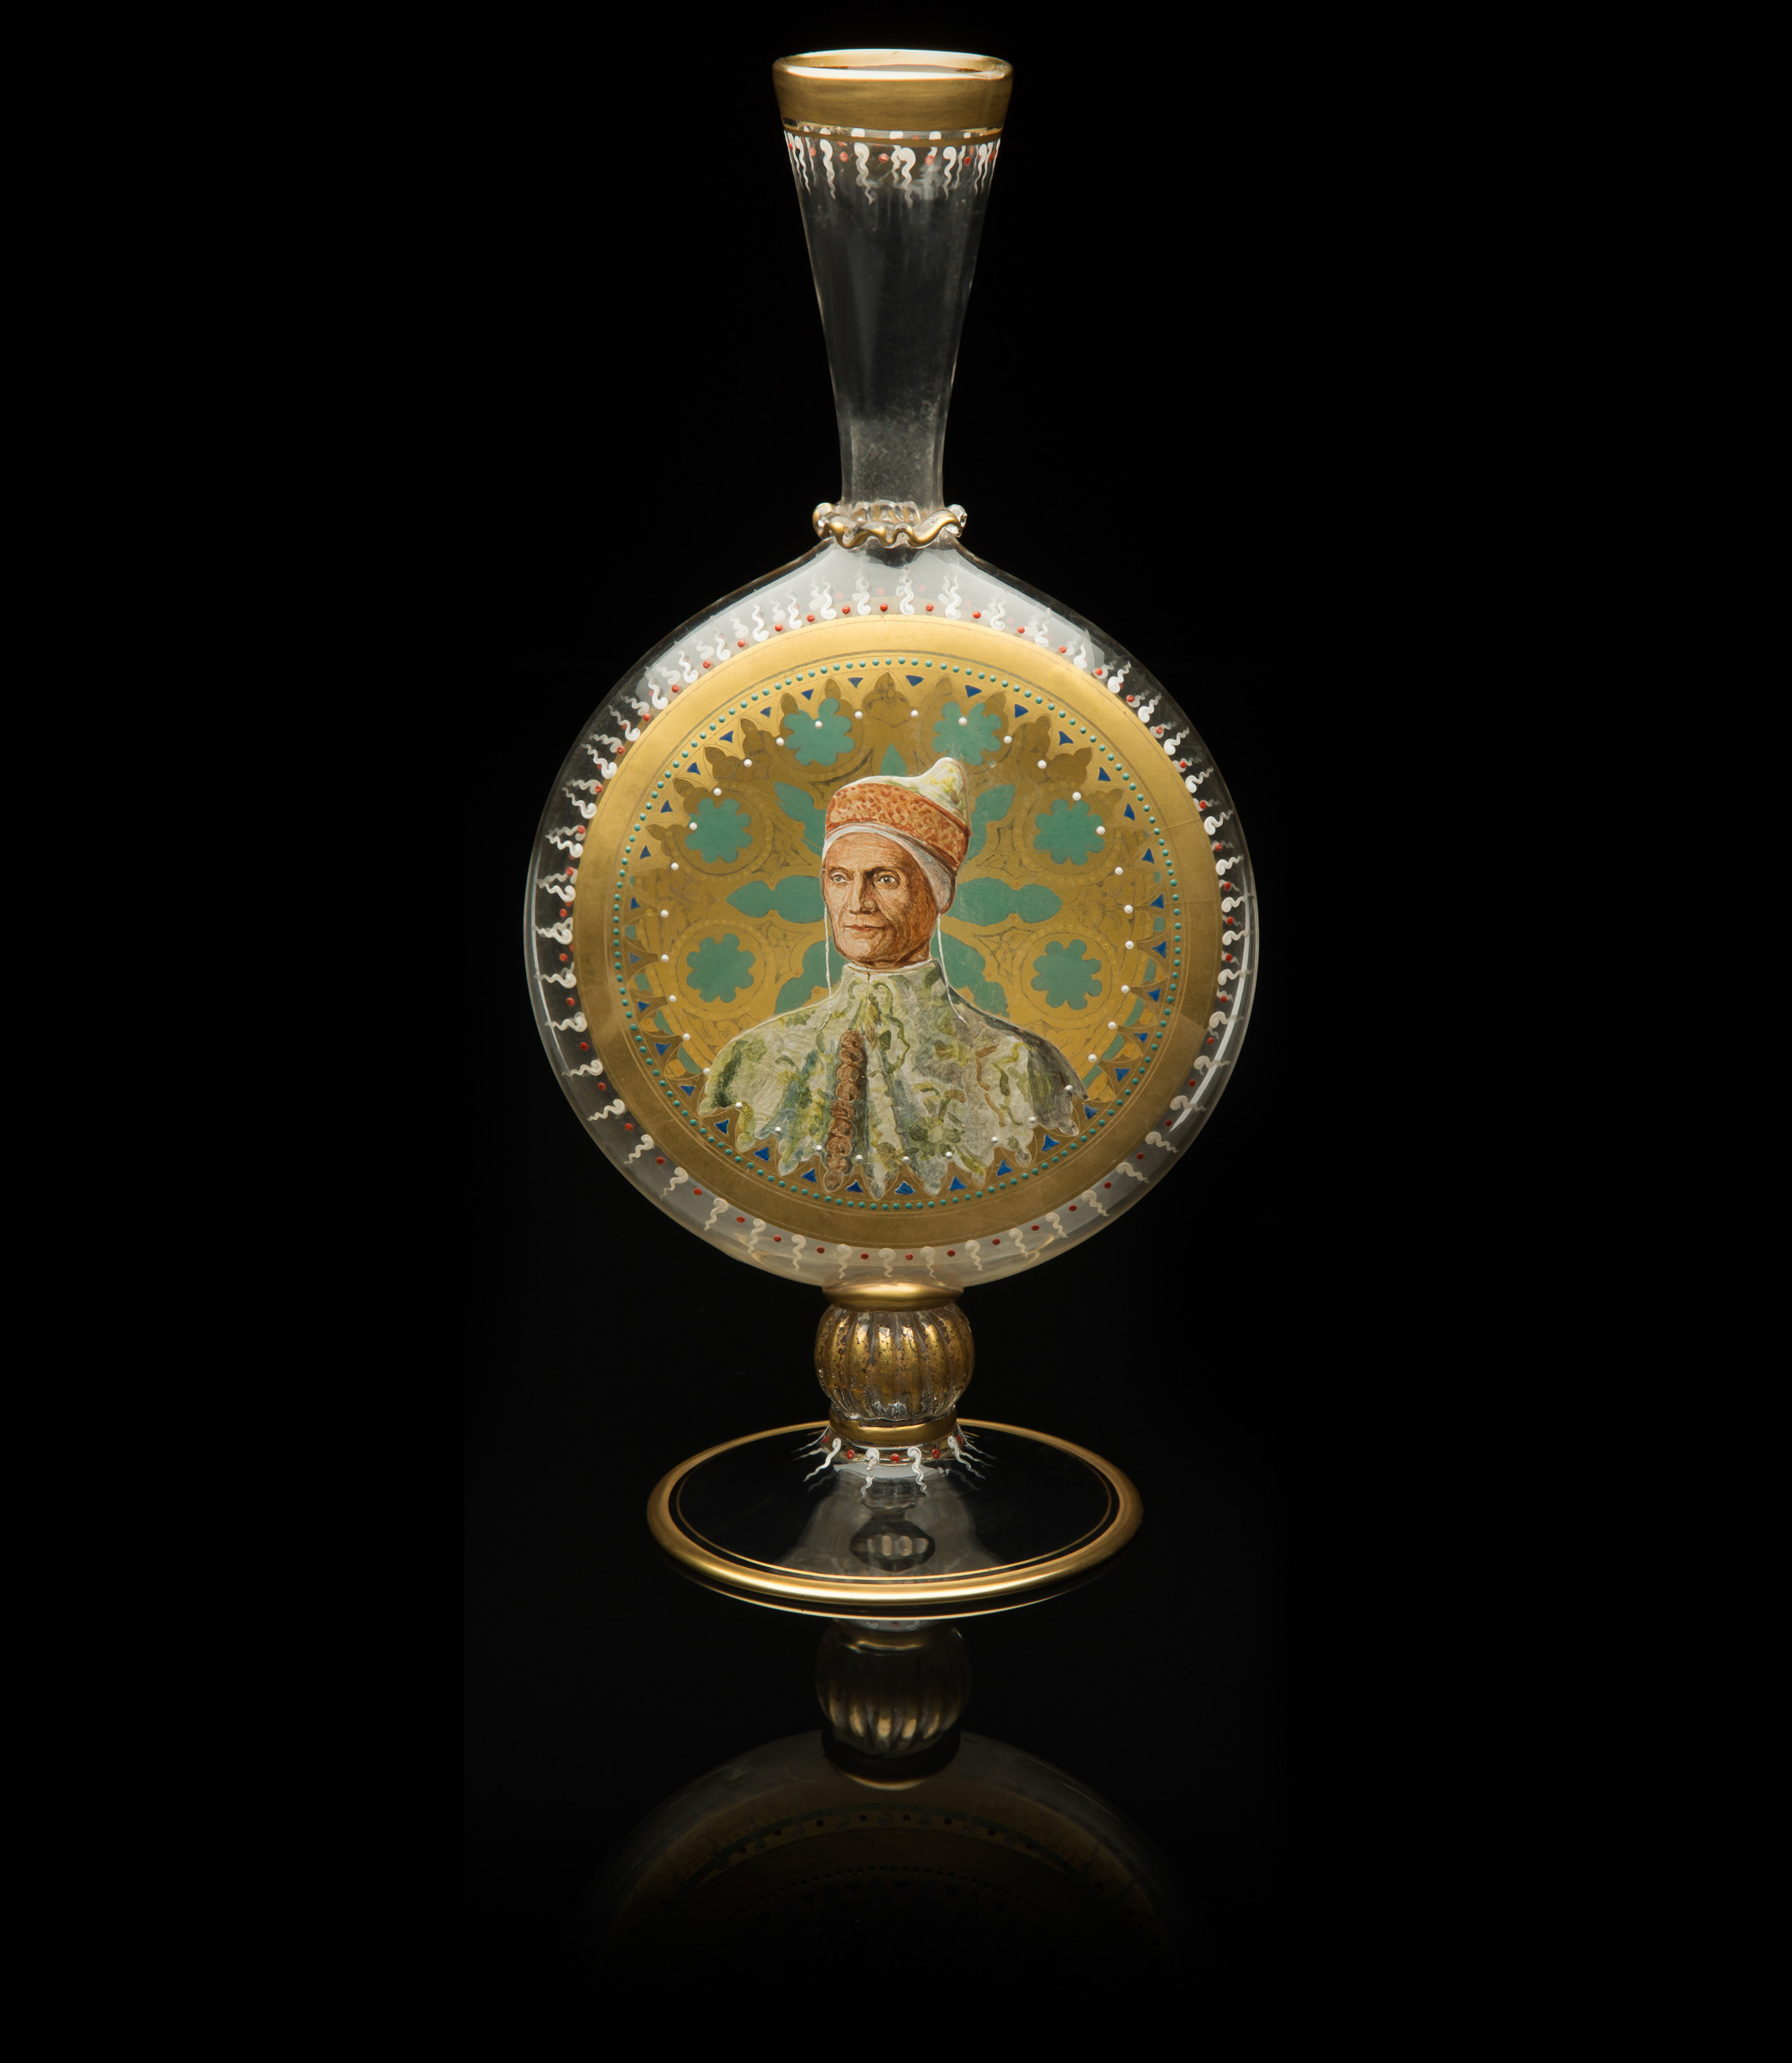  Unknown Ventian,&nbsp; Polychrome Enameled Pilgrim Flask &nbsp;(glass and&nbsp;gilding, 13 3/8 inches), VV.467 